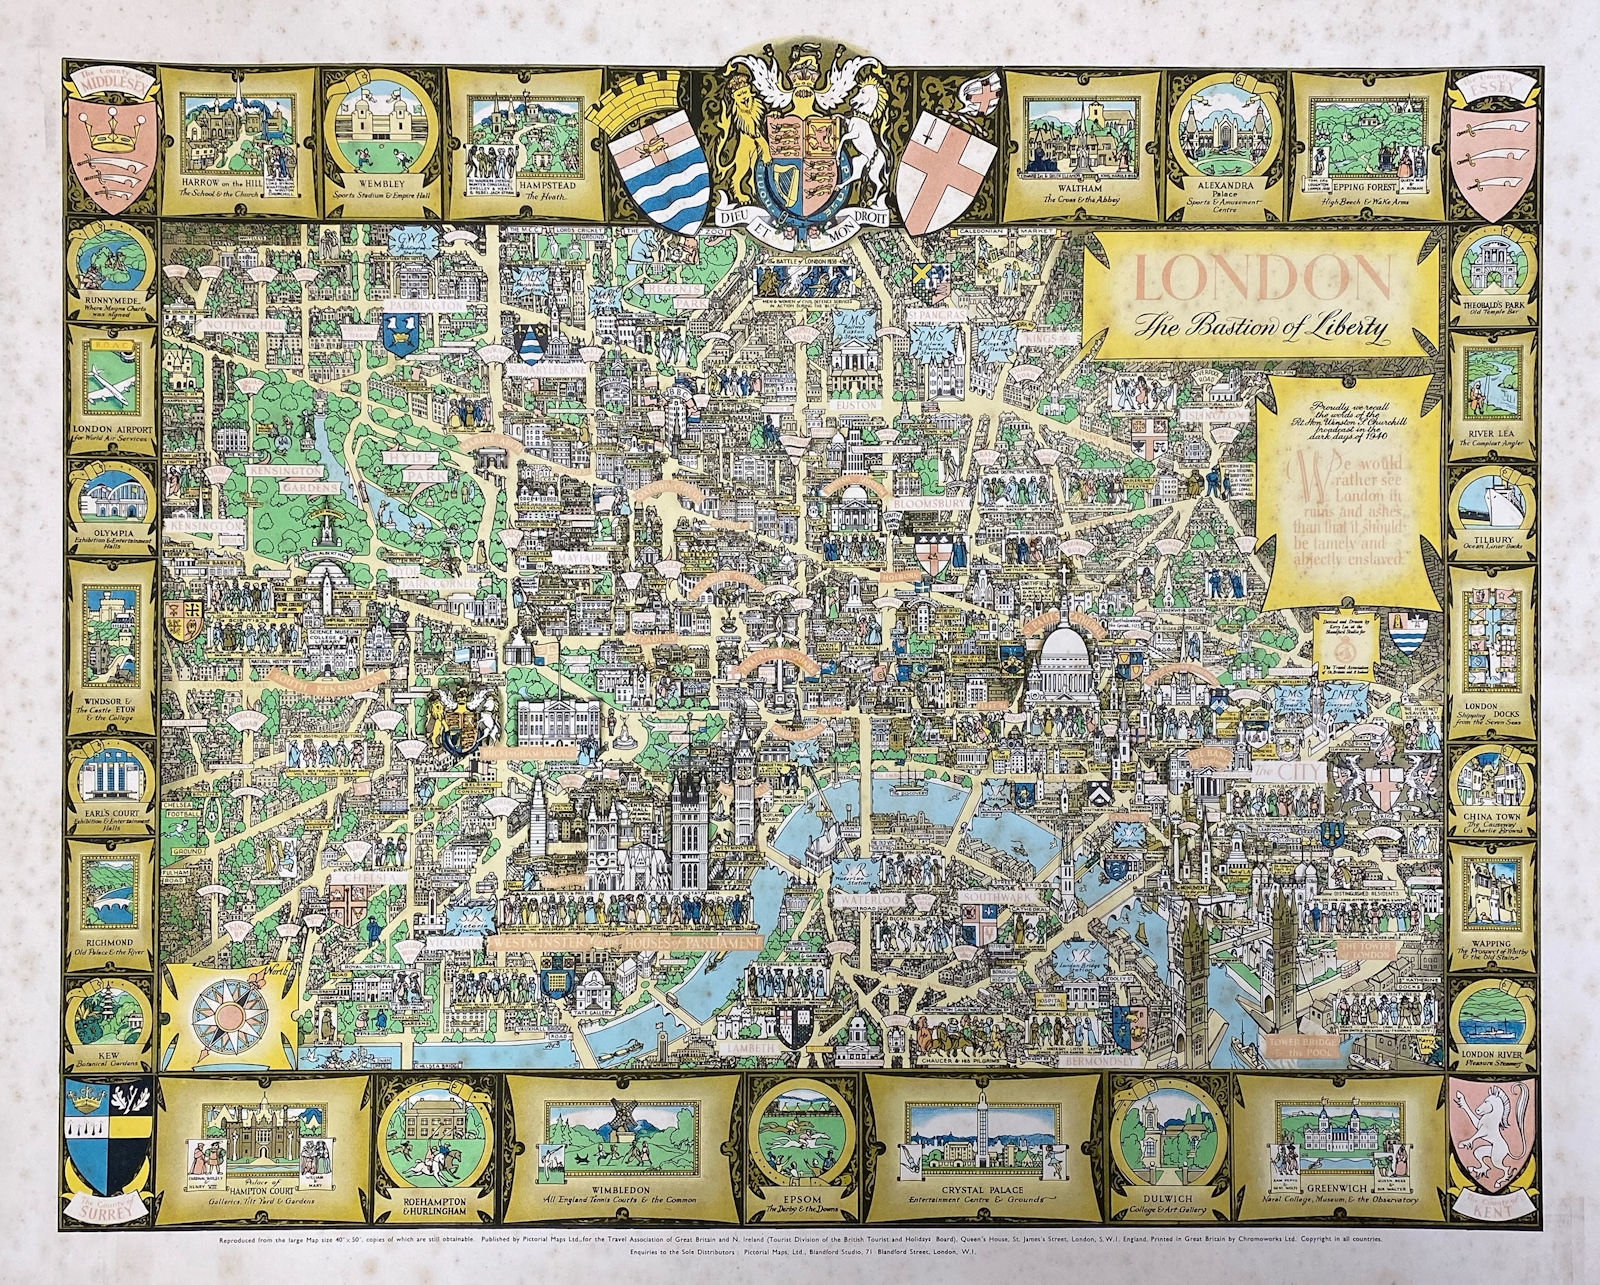 London - The Bastion of Liberty. Pictorial map by Kerry Lee c1946 old